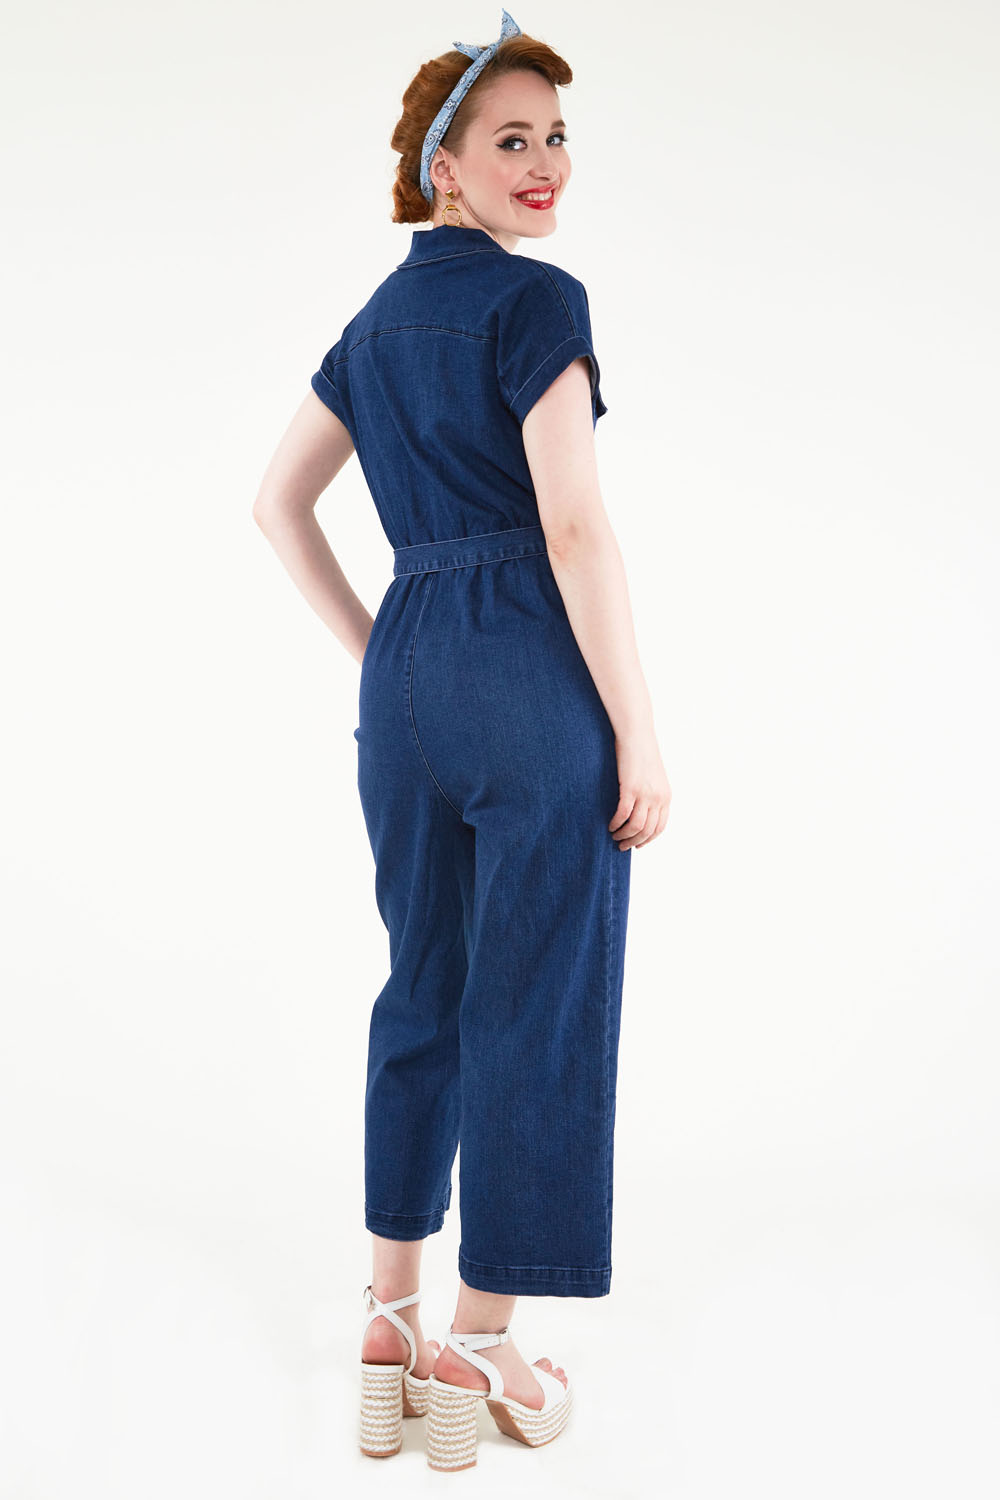 Poppy Denim Utility Jumpsuit, Vintage Inspired Fashion & Accessories, 40s  and 50s Clothing and Rockabilly Collection